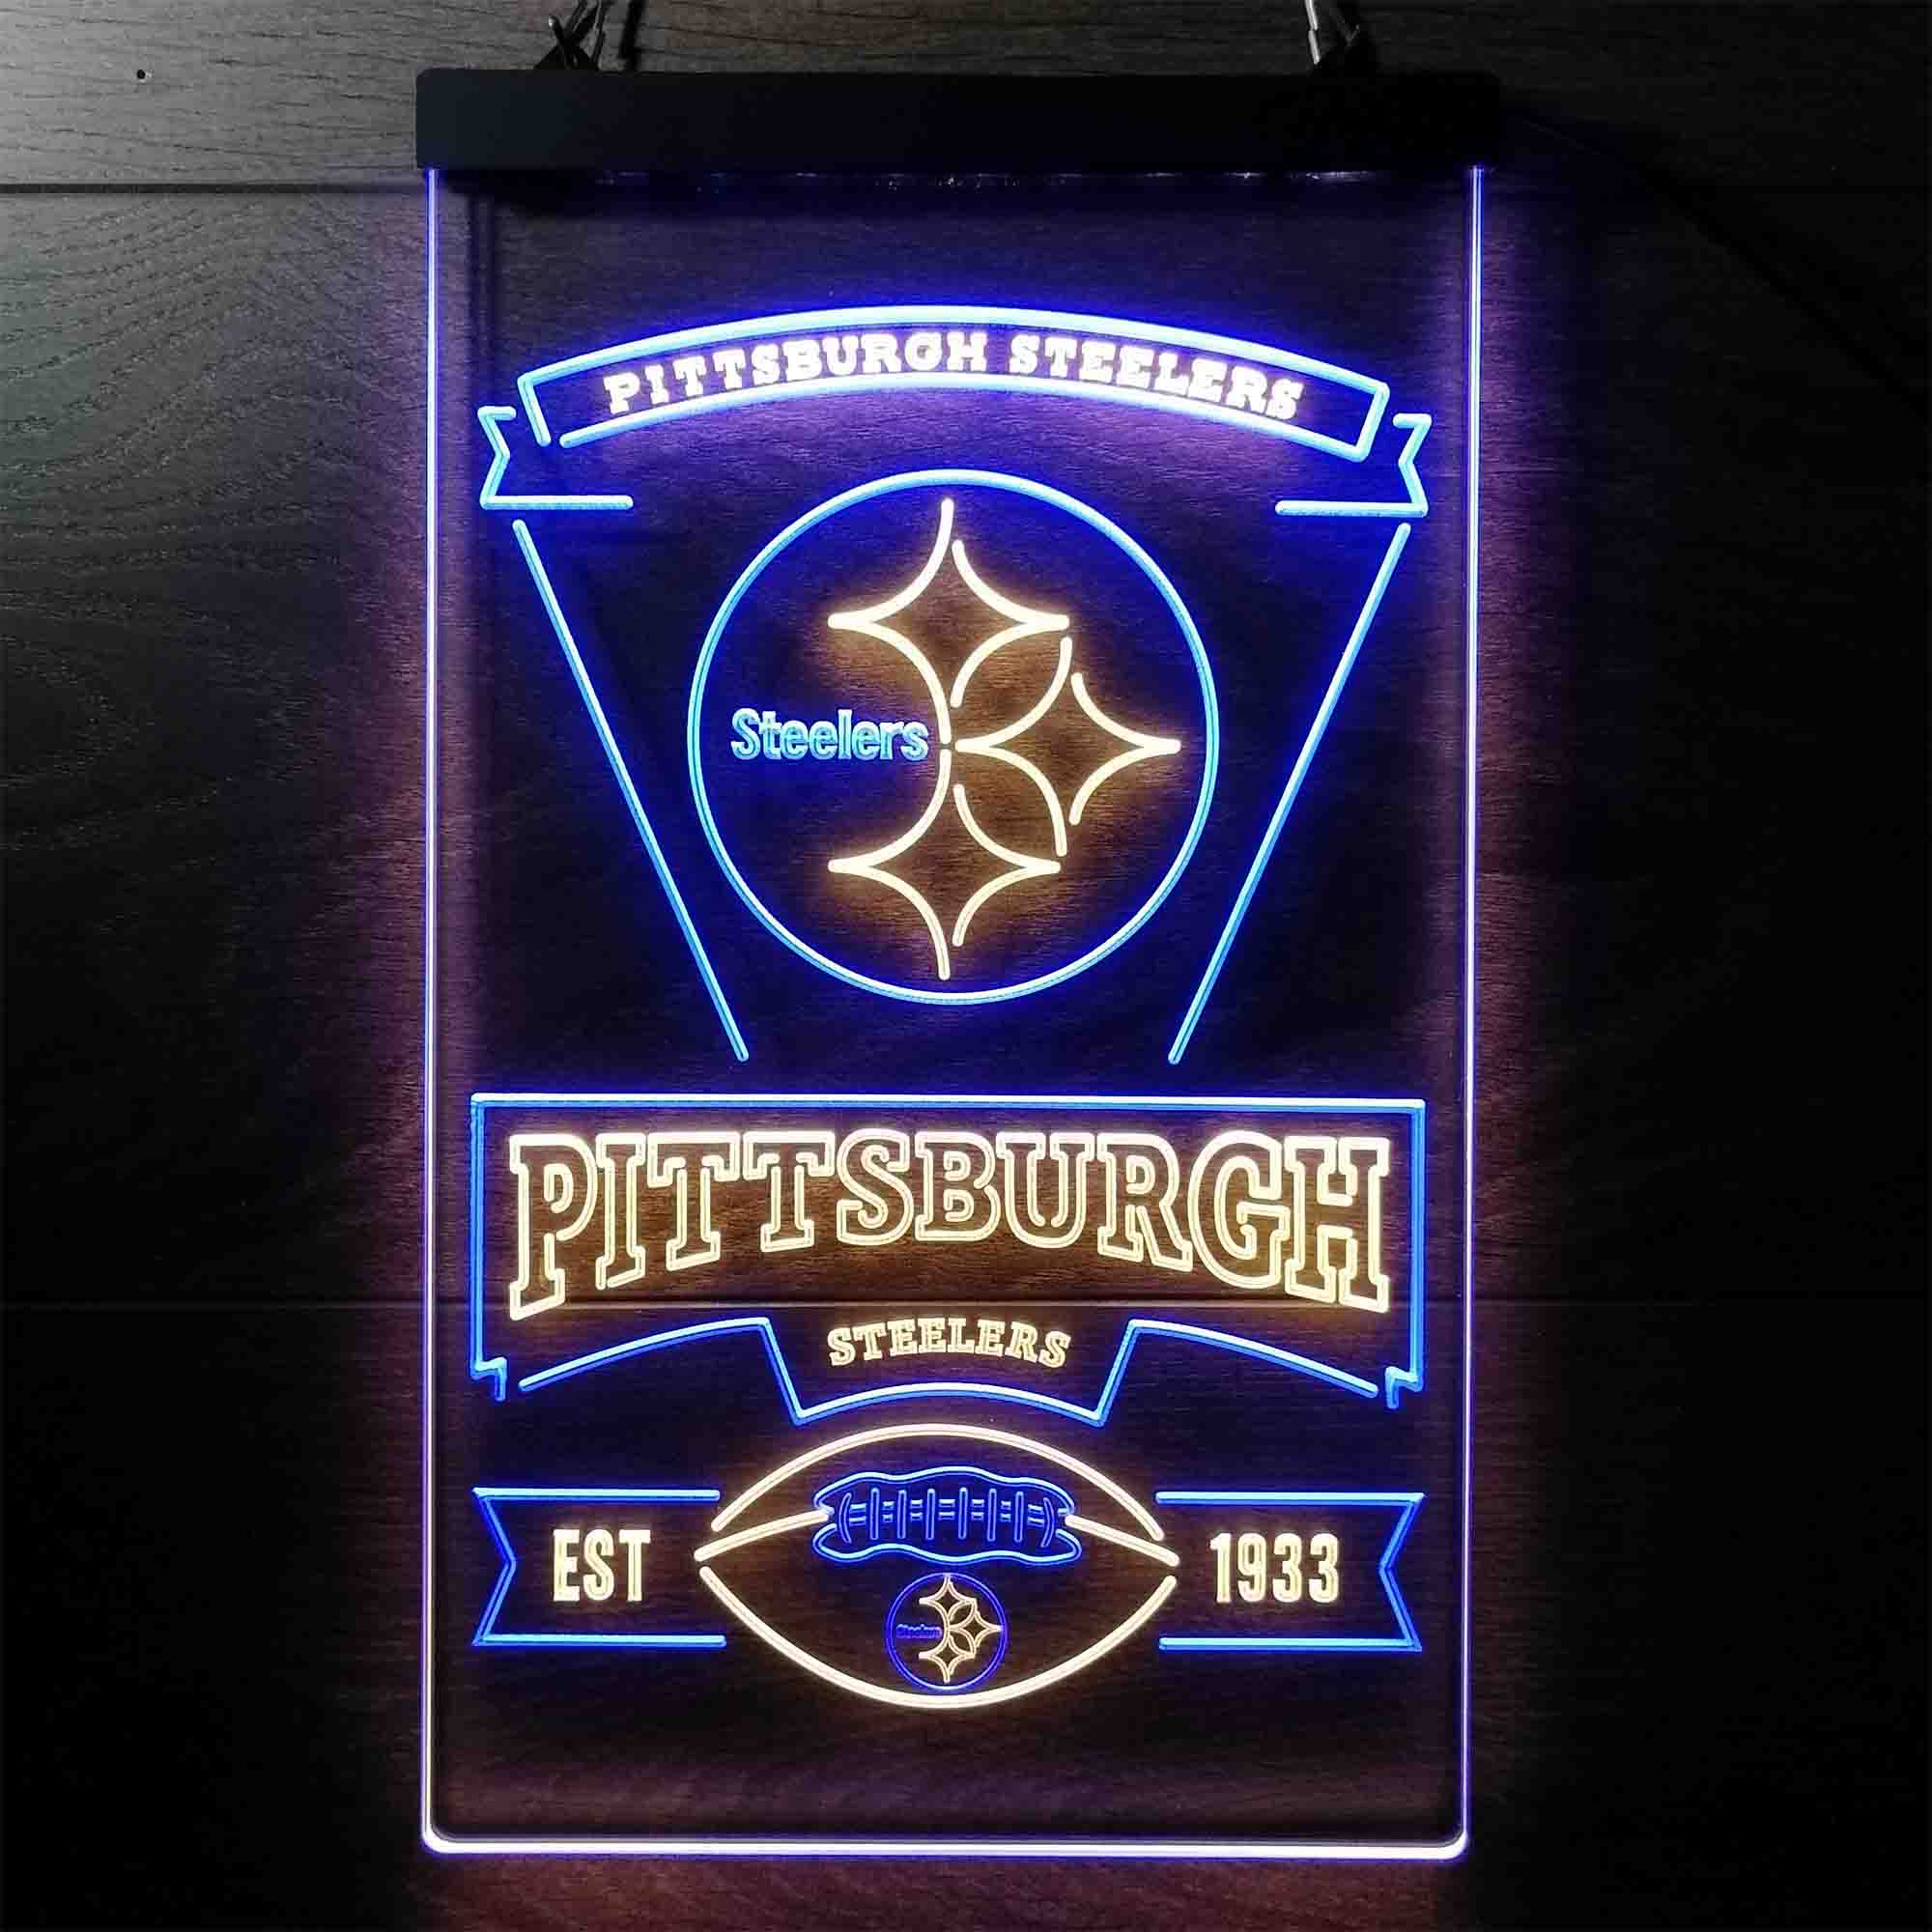 Pittsburgh Steelers Est. 1933 Neon-Like LED Sign